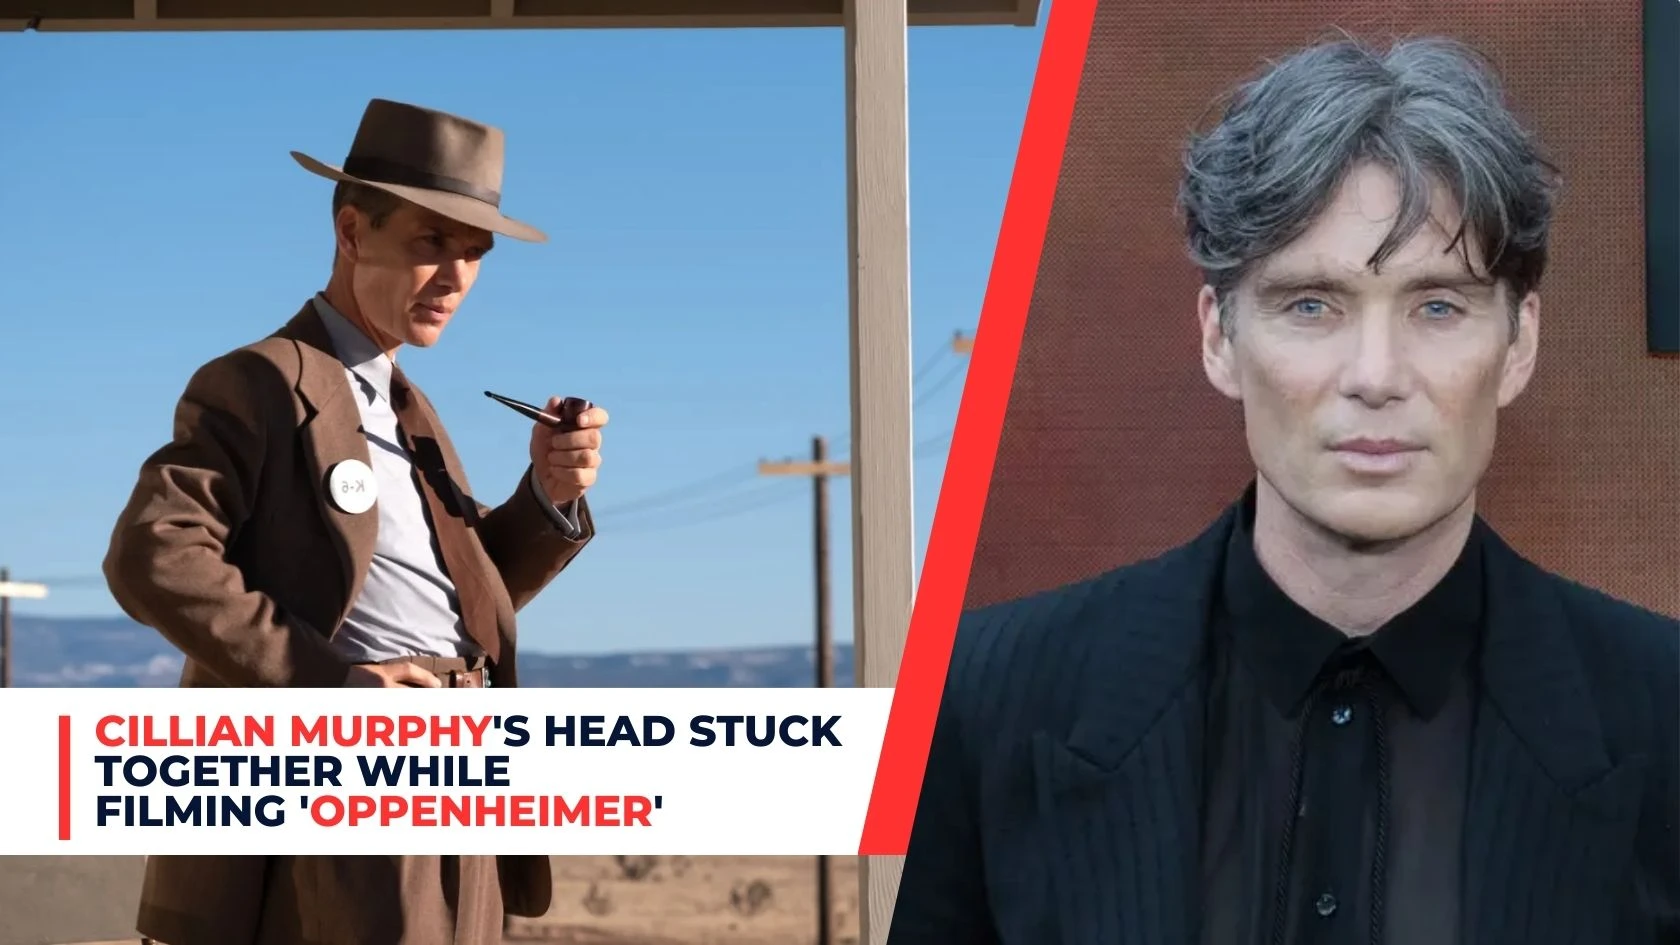 Cillian Murphy's Head Stuck Together While Filming 'Oppenheimer'